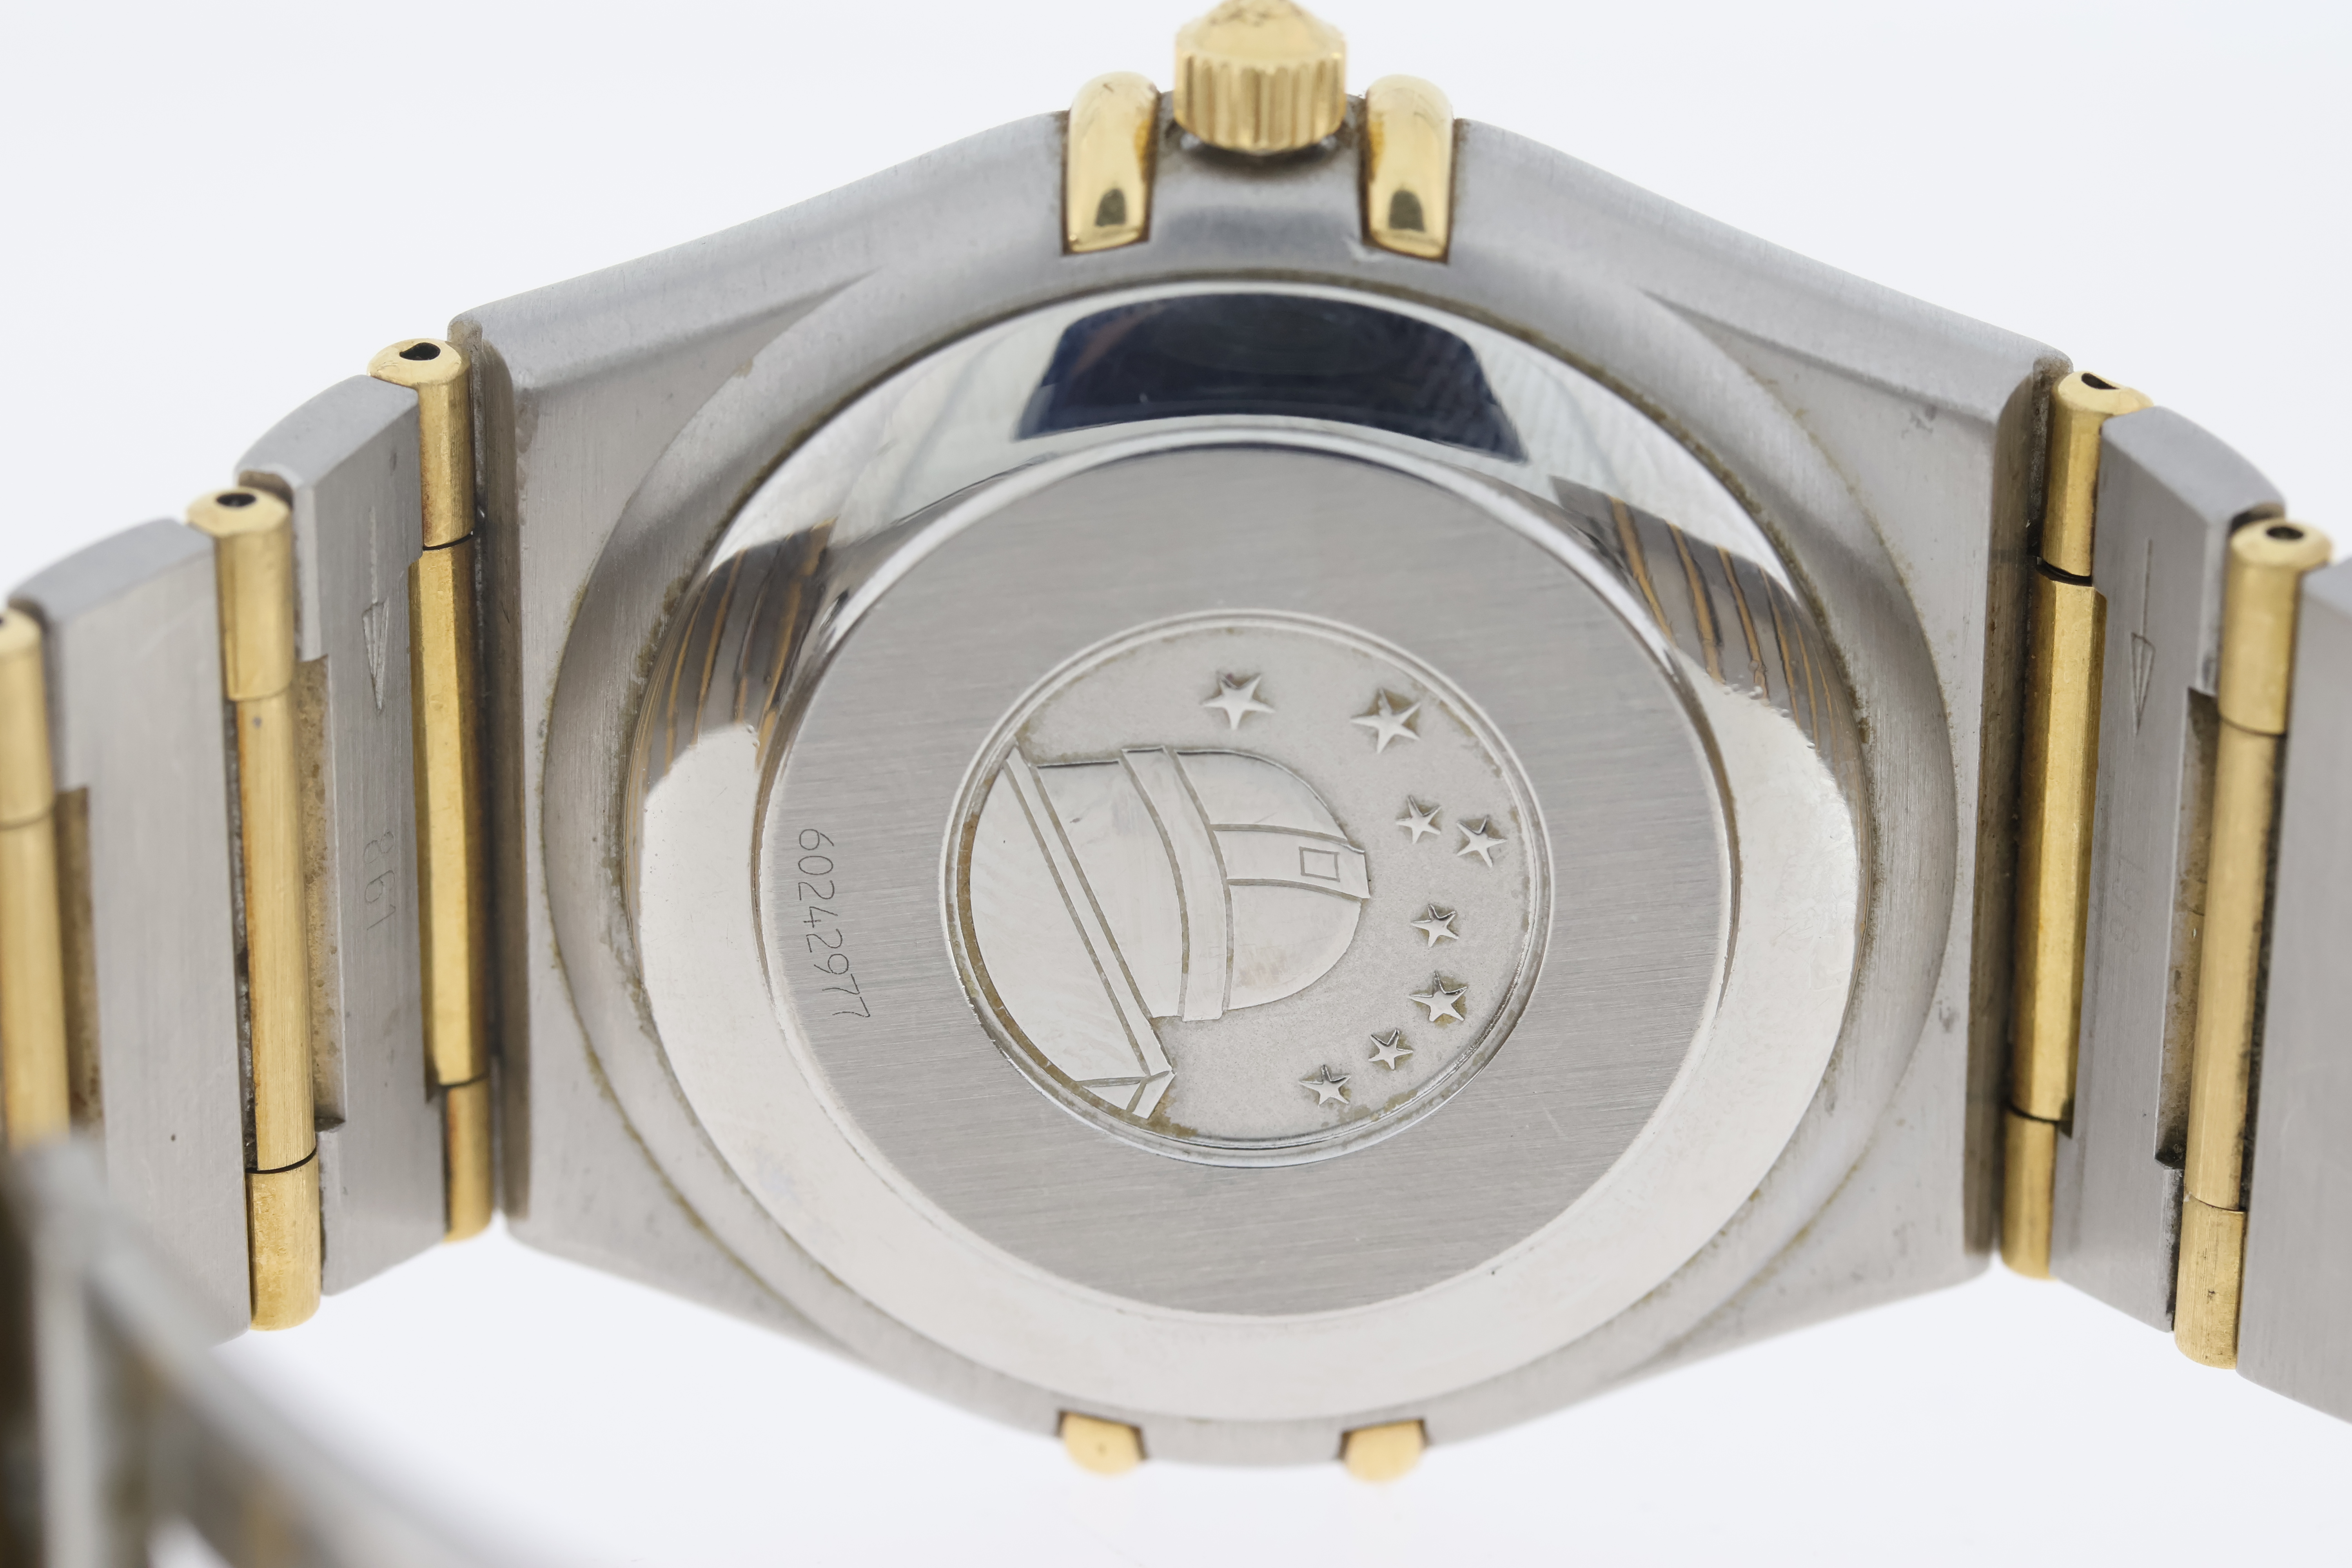 Omega Constellation Reference 368.1201 Circa 2000 - Image 4 of 4